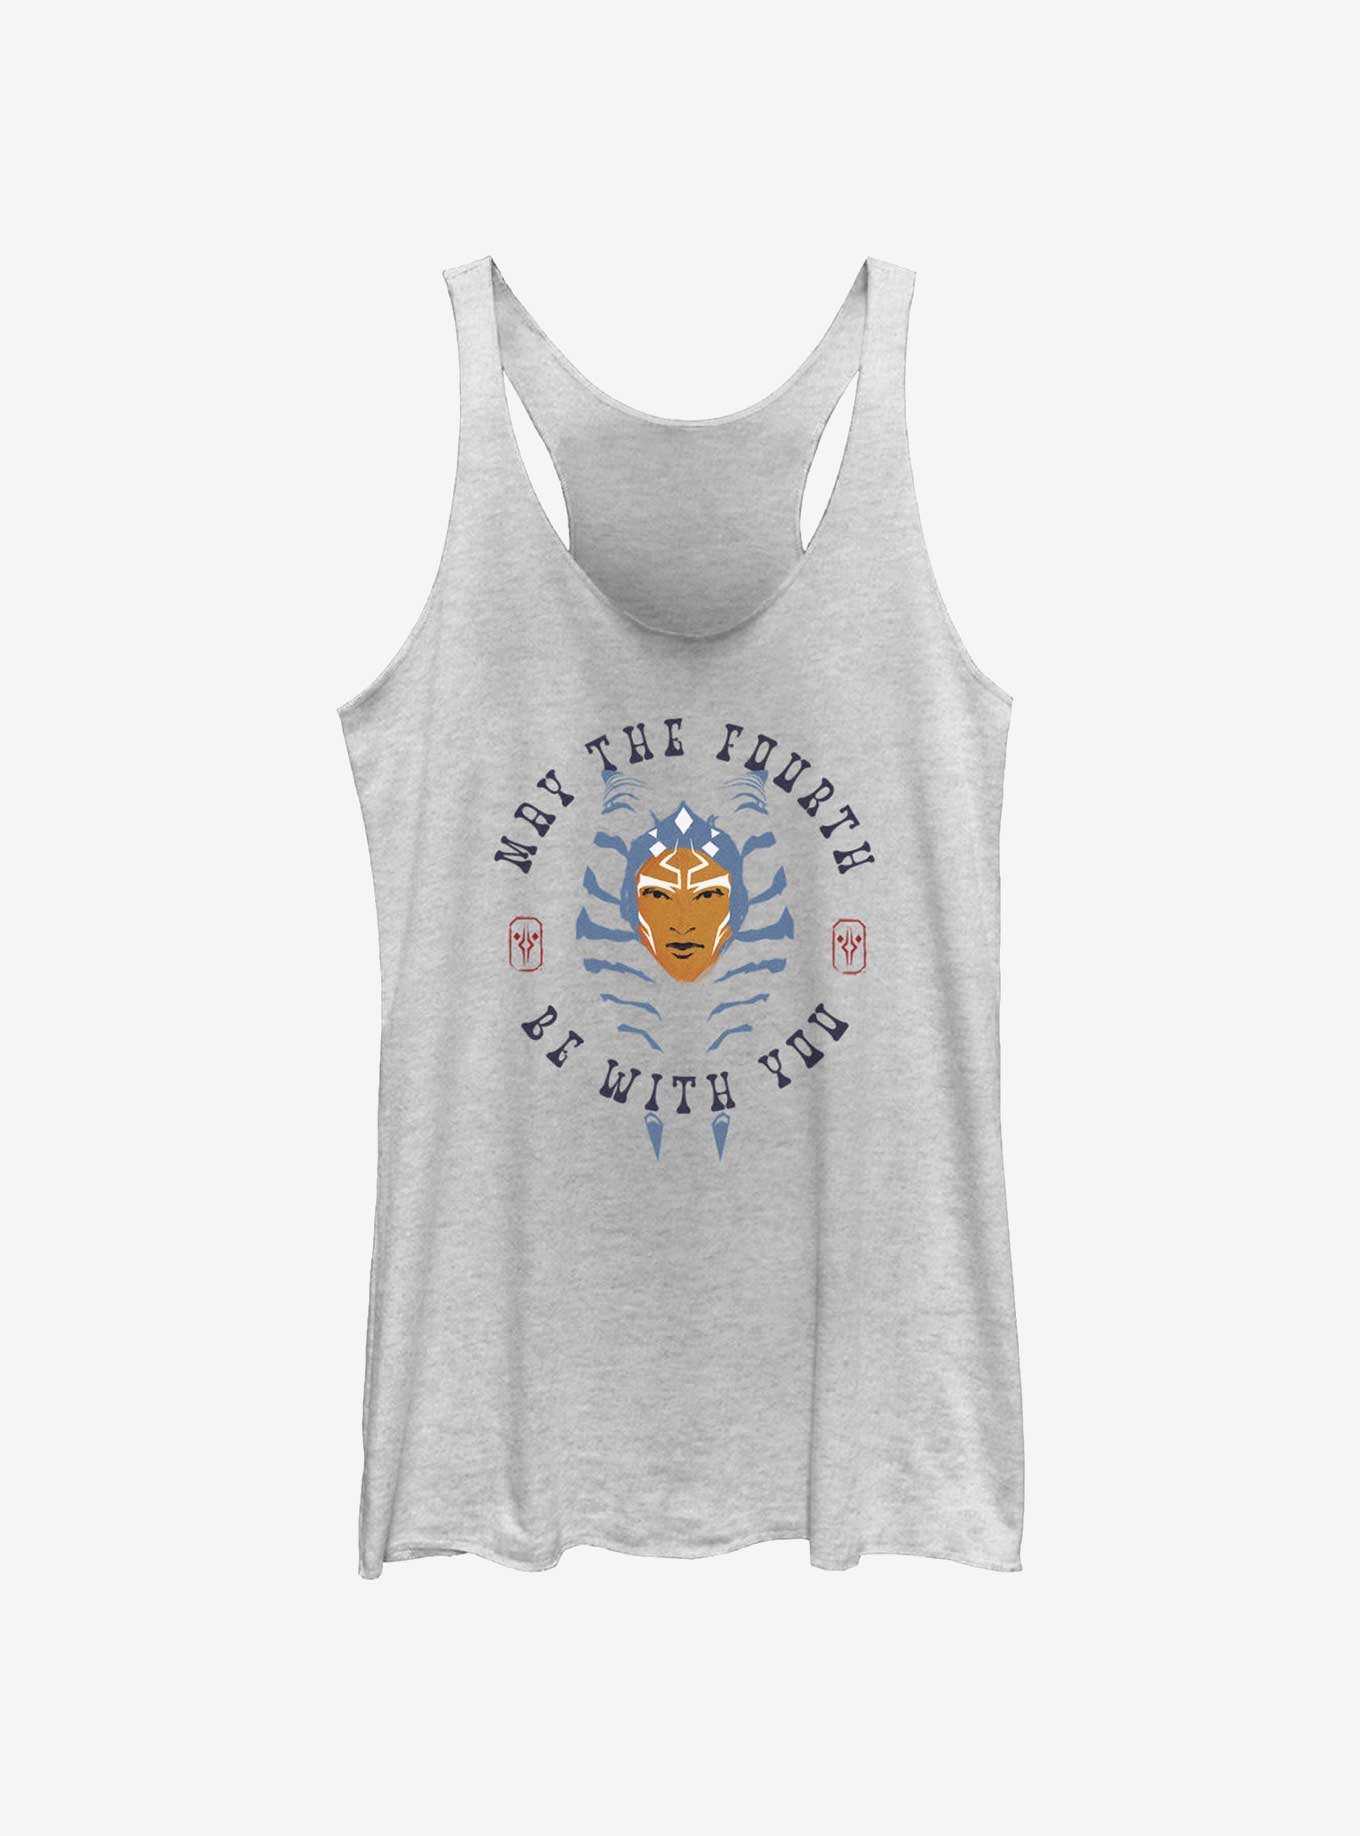 Star Wars Ahsoka May The Fourth Be With You Girls Tank, , hi-res